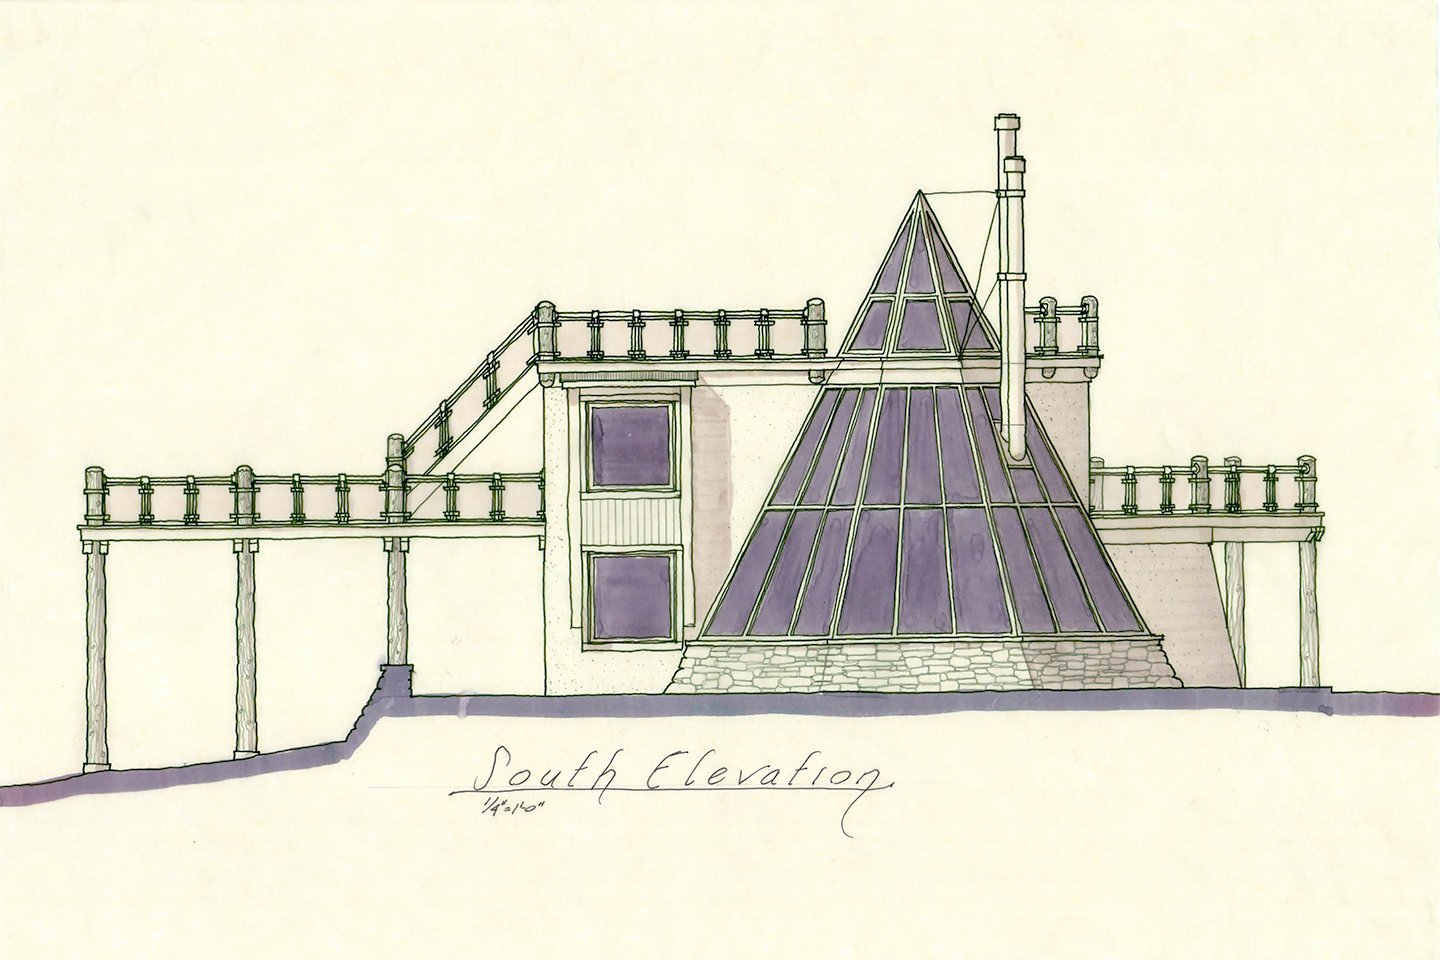 Presentation drawing of the south elevation